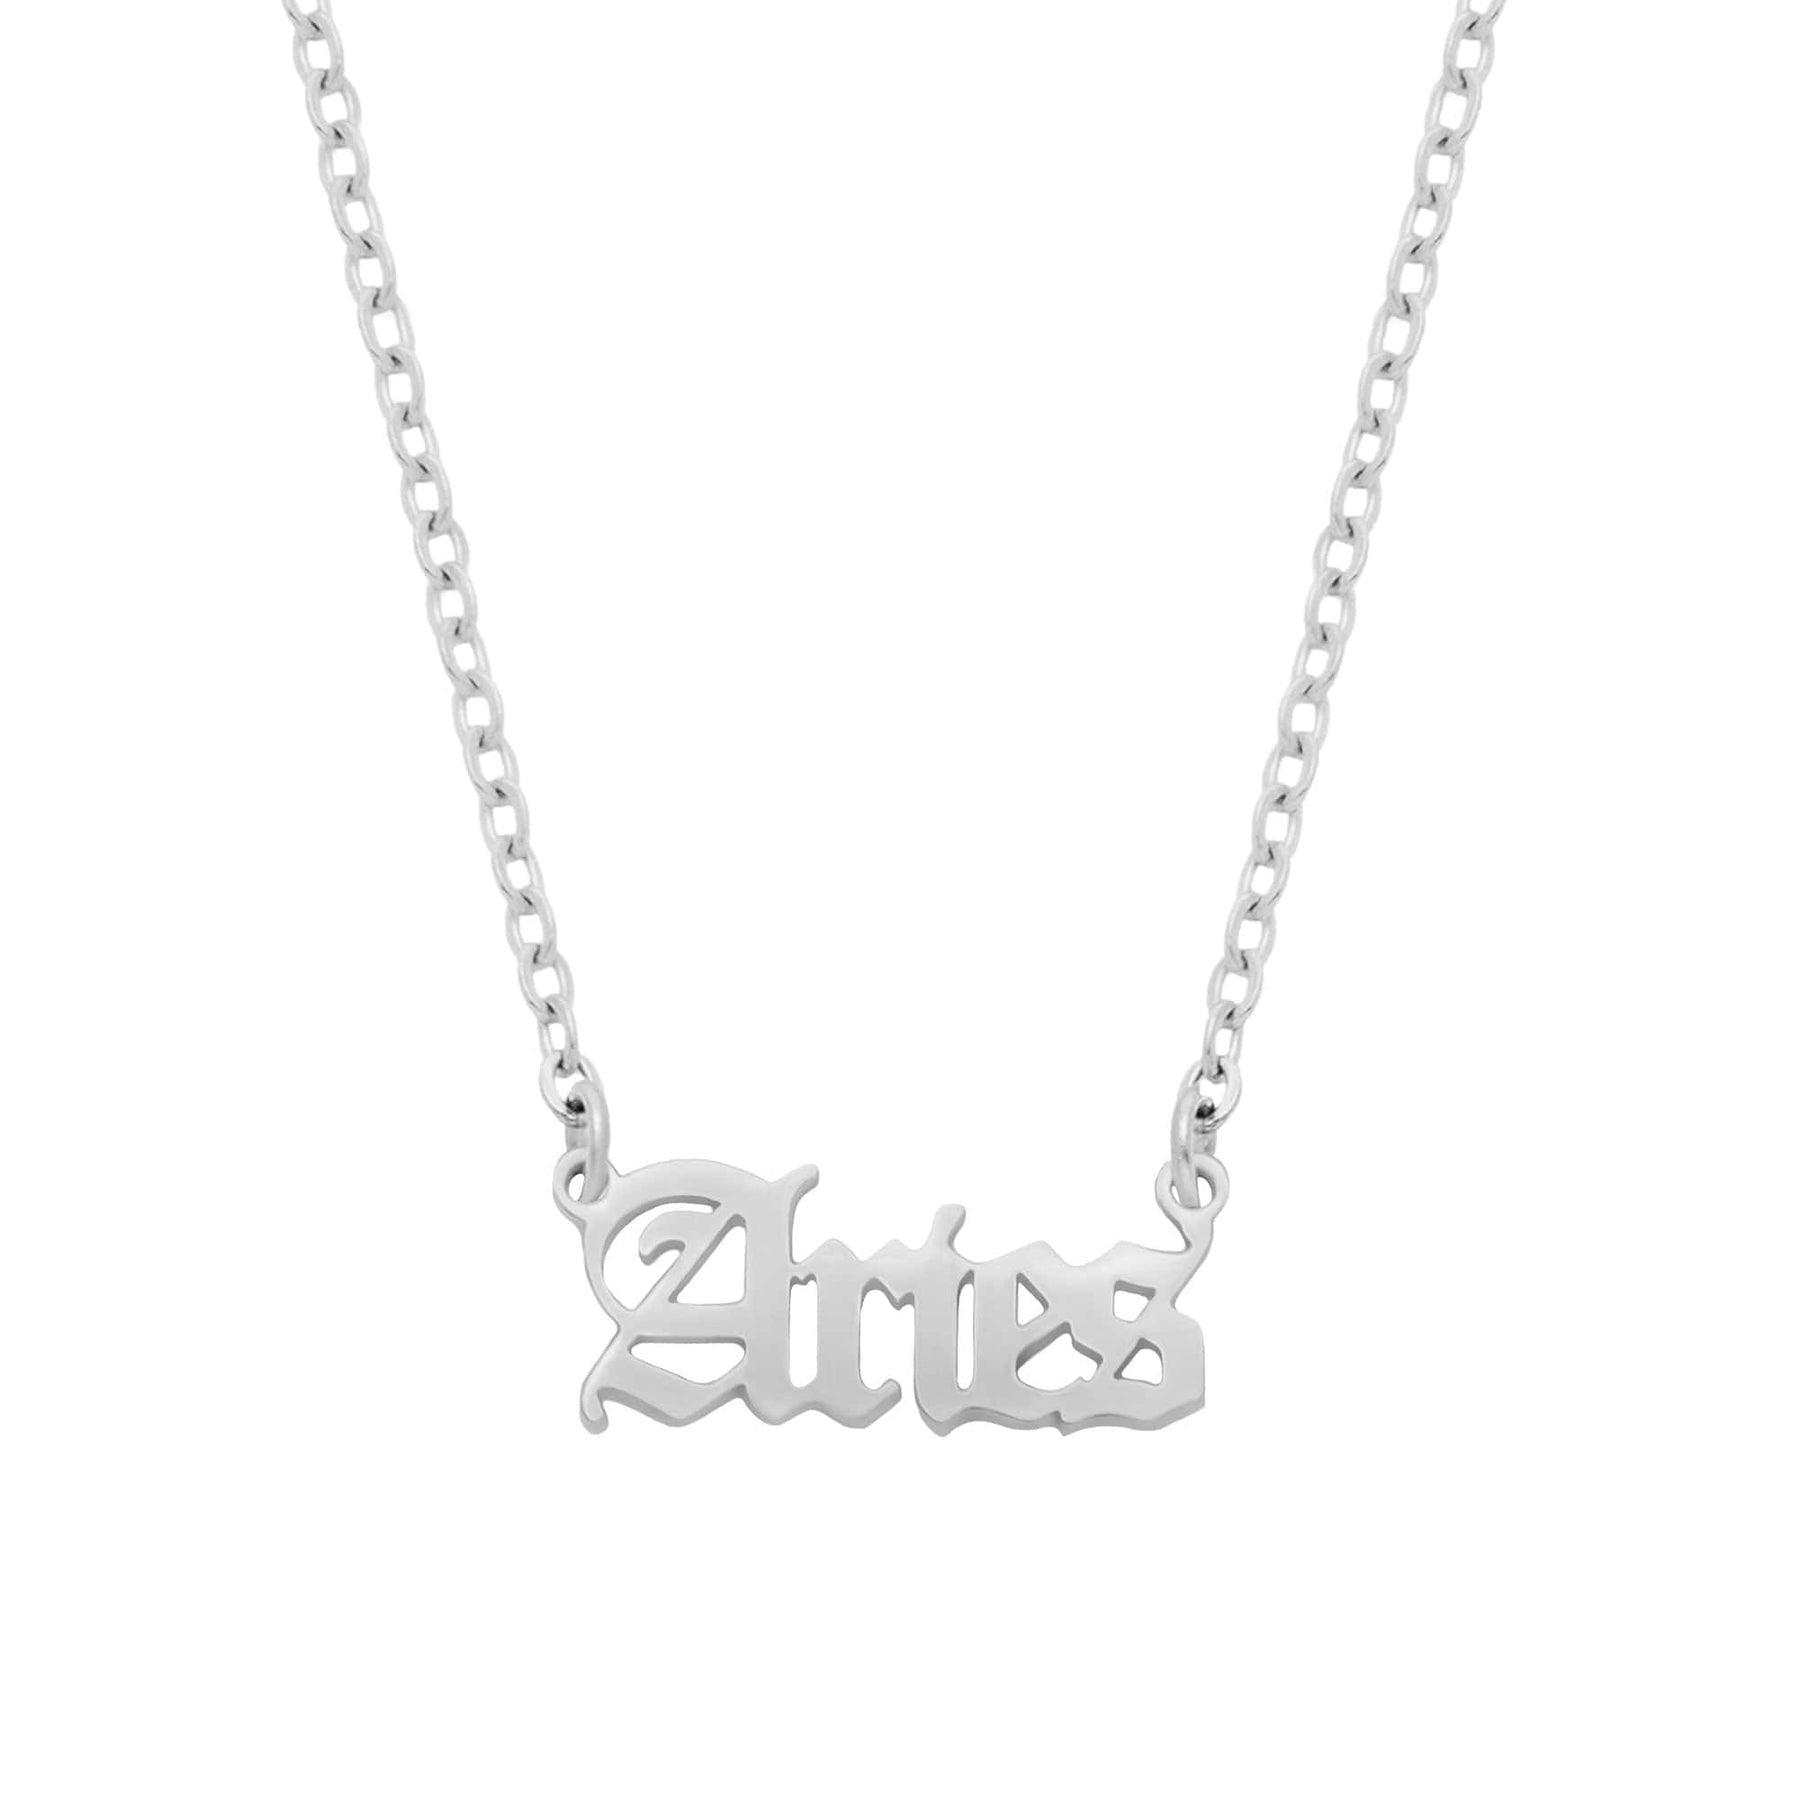 BohoMoon Stainless Steel Old English Zodiac Necklace Silver / Aries